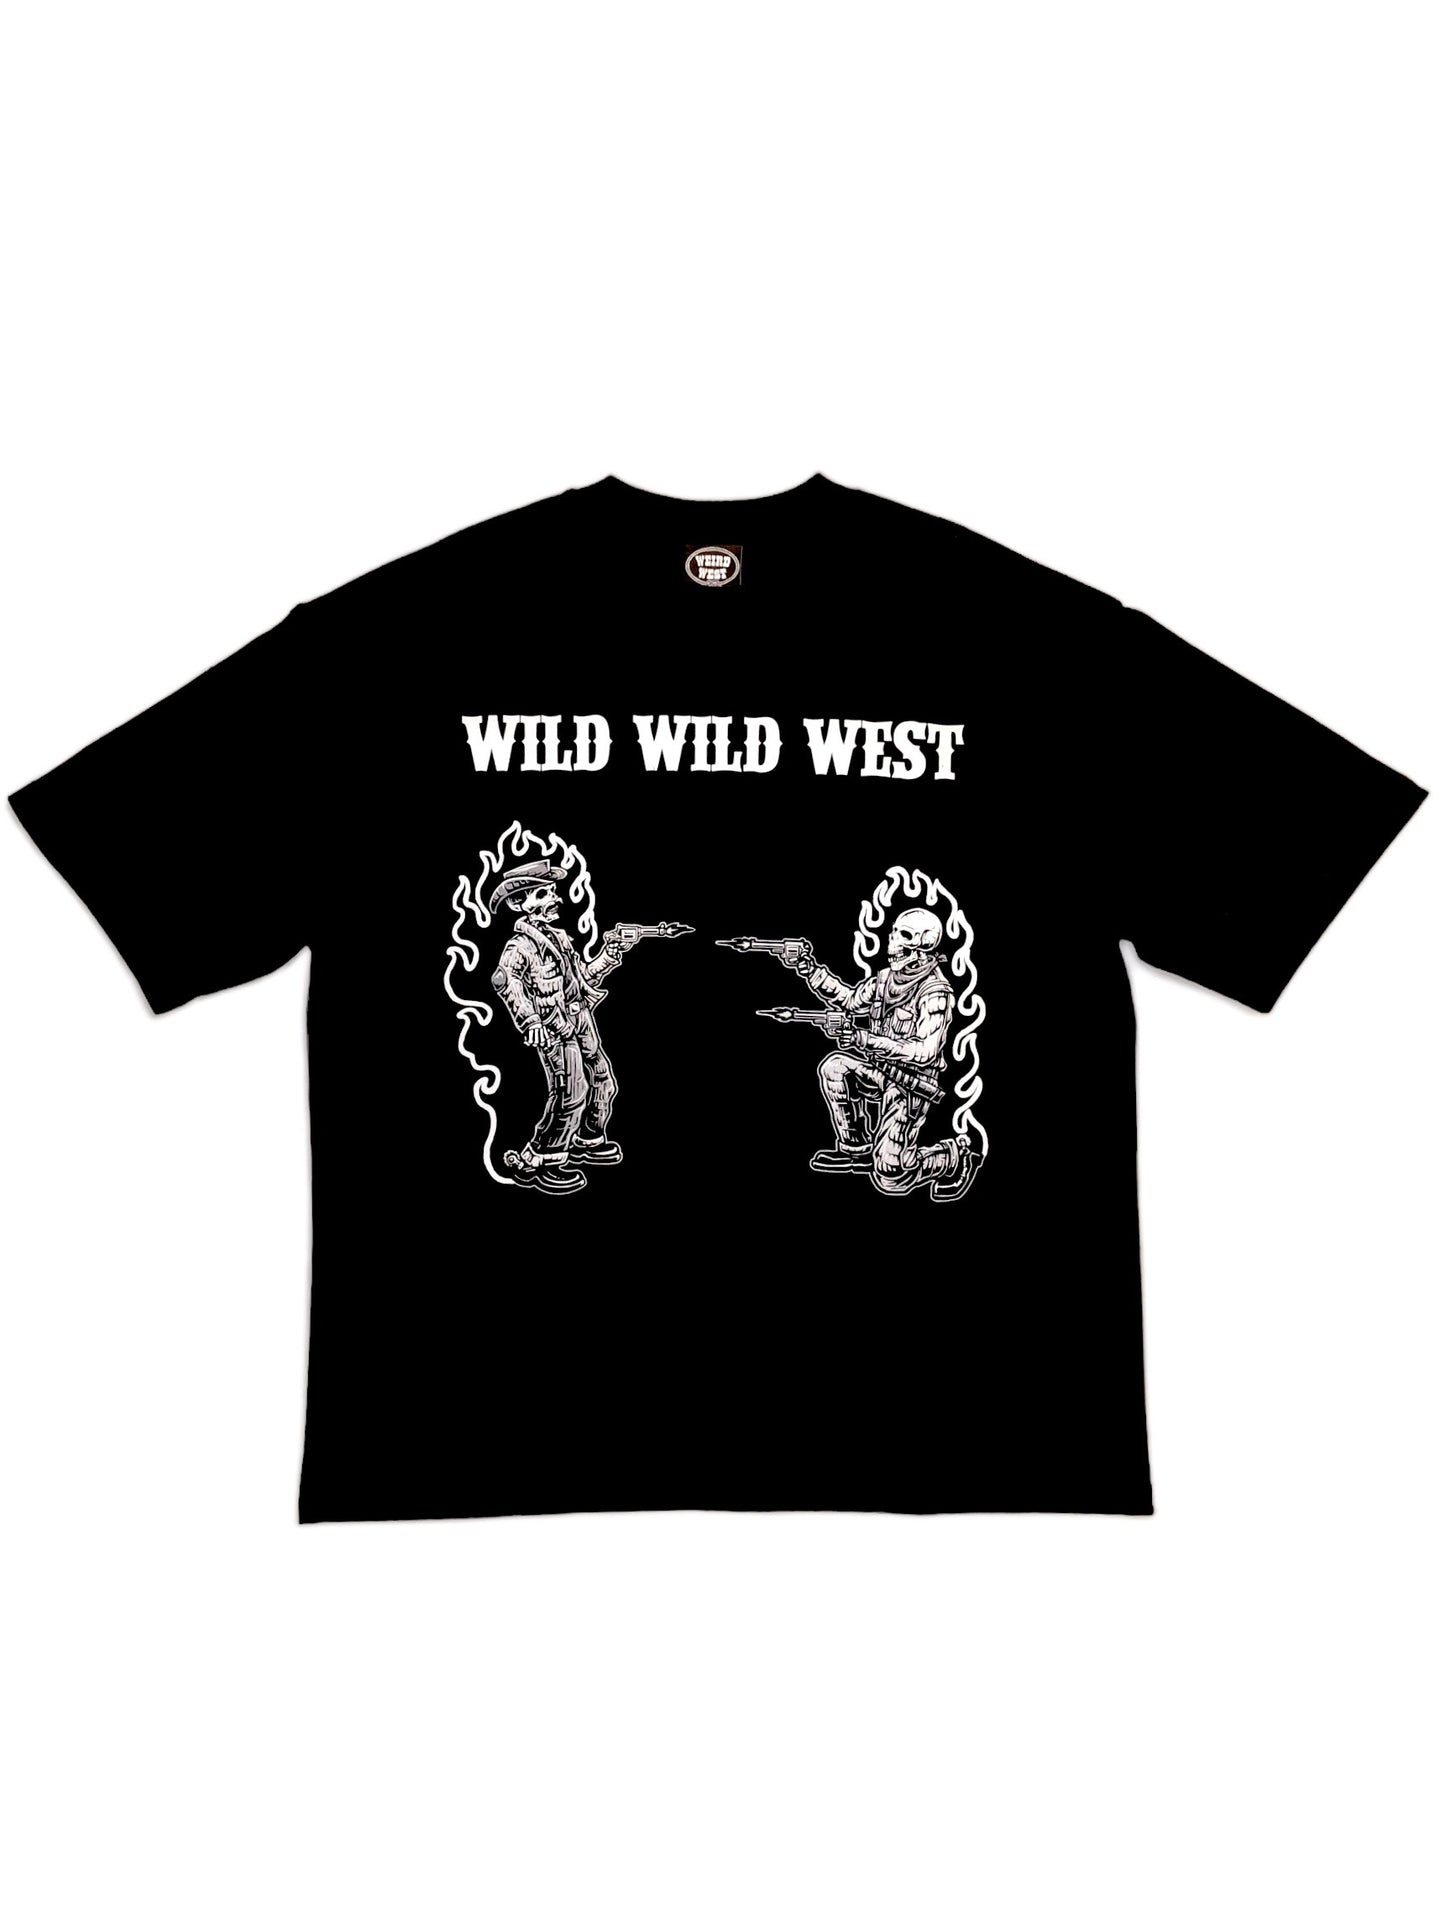 Heavyweight oversized baggy black tshirt made from 100% cotton with wild west themed design with an old school cowboy shootout